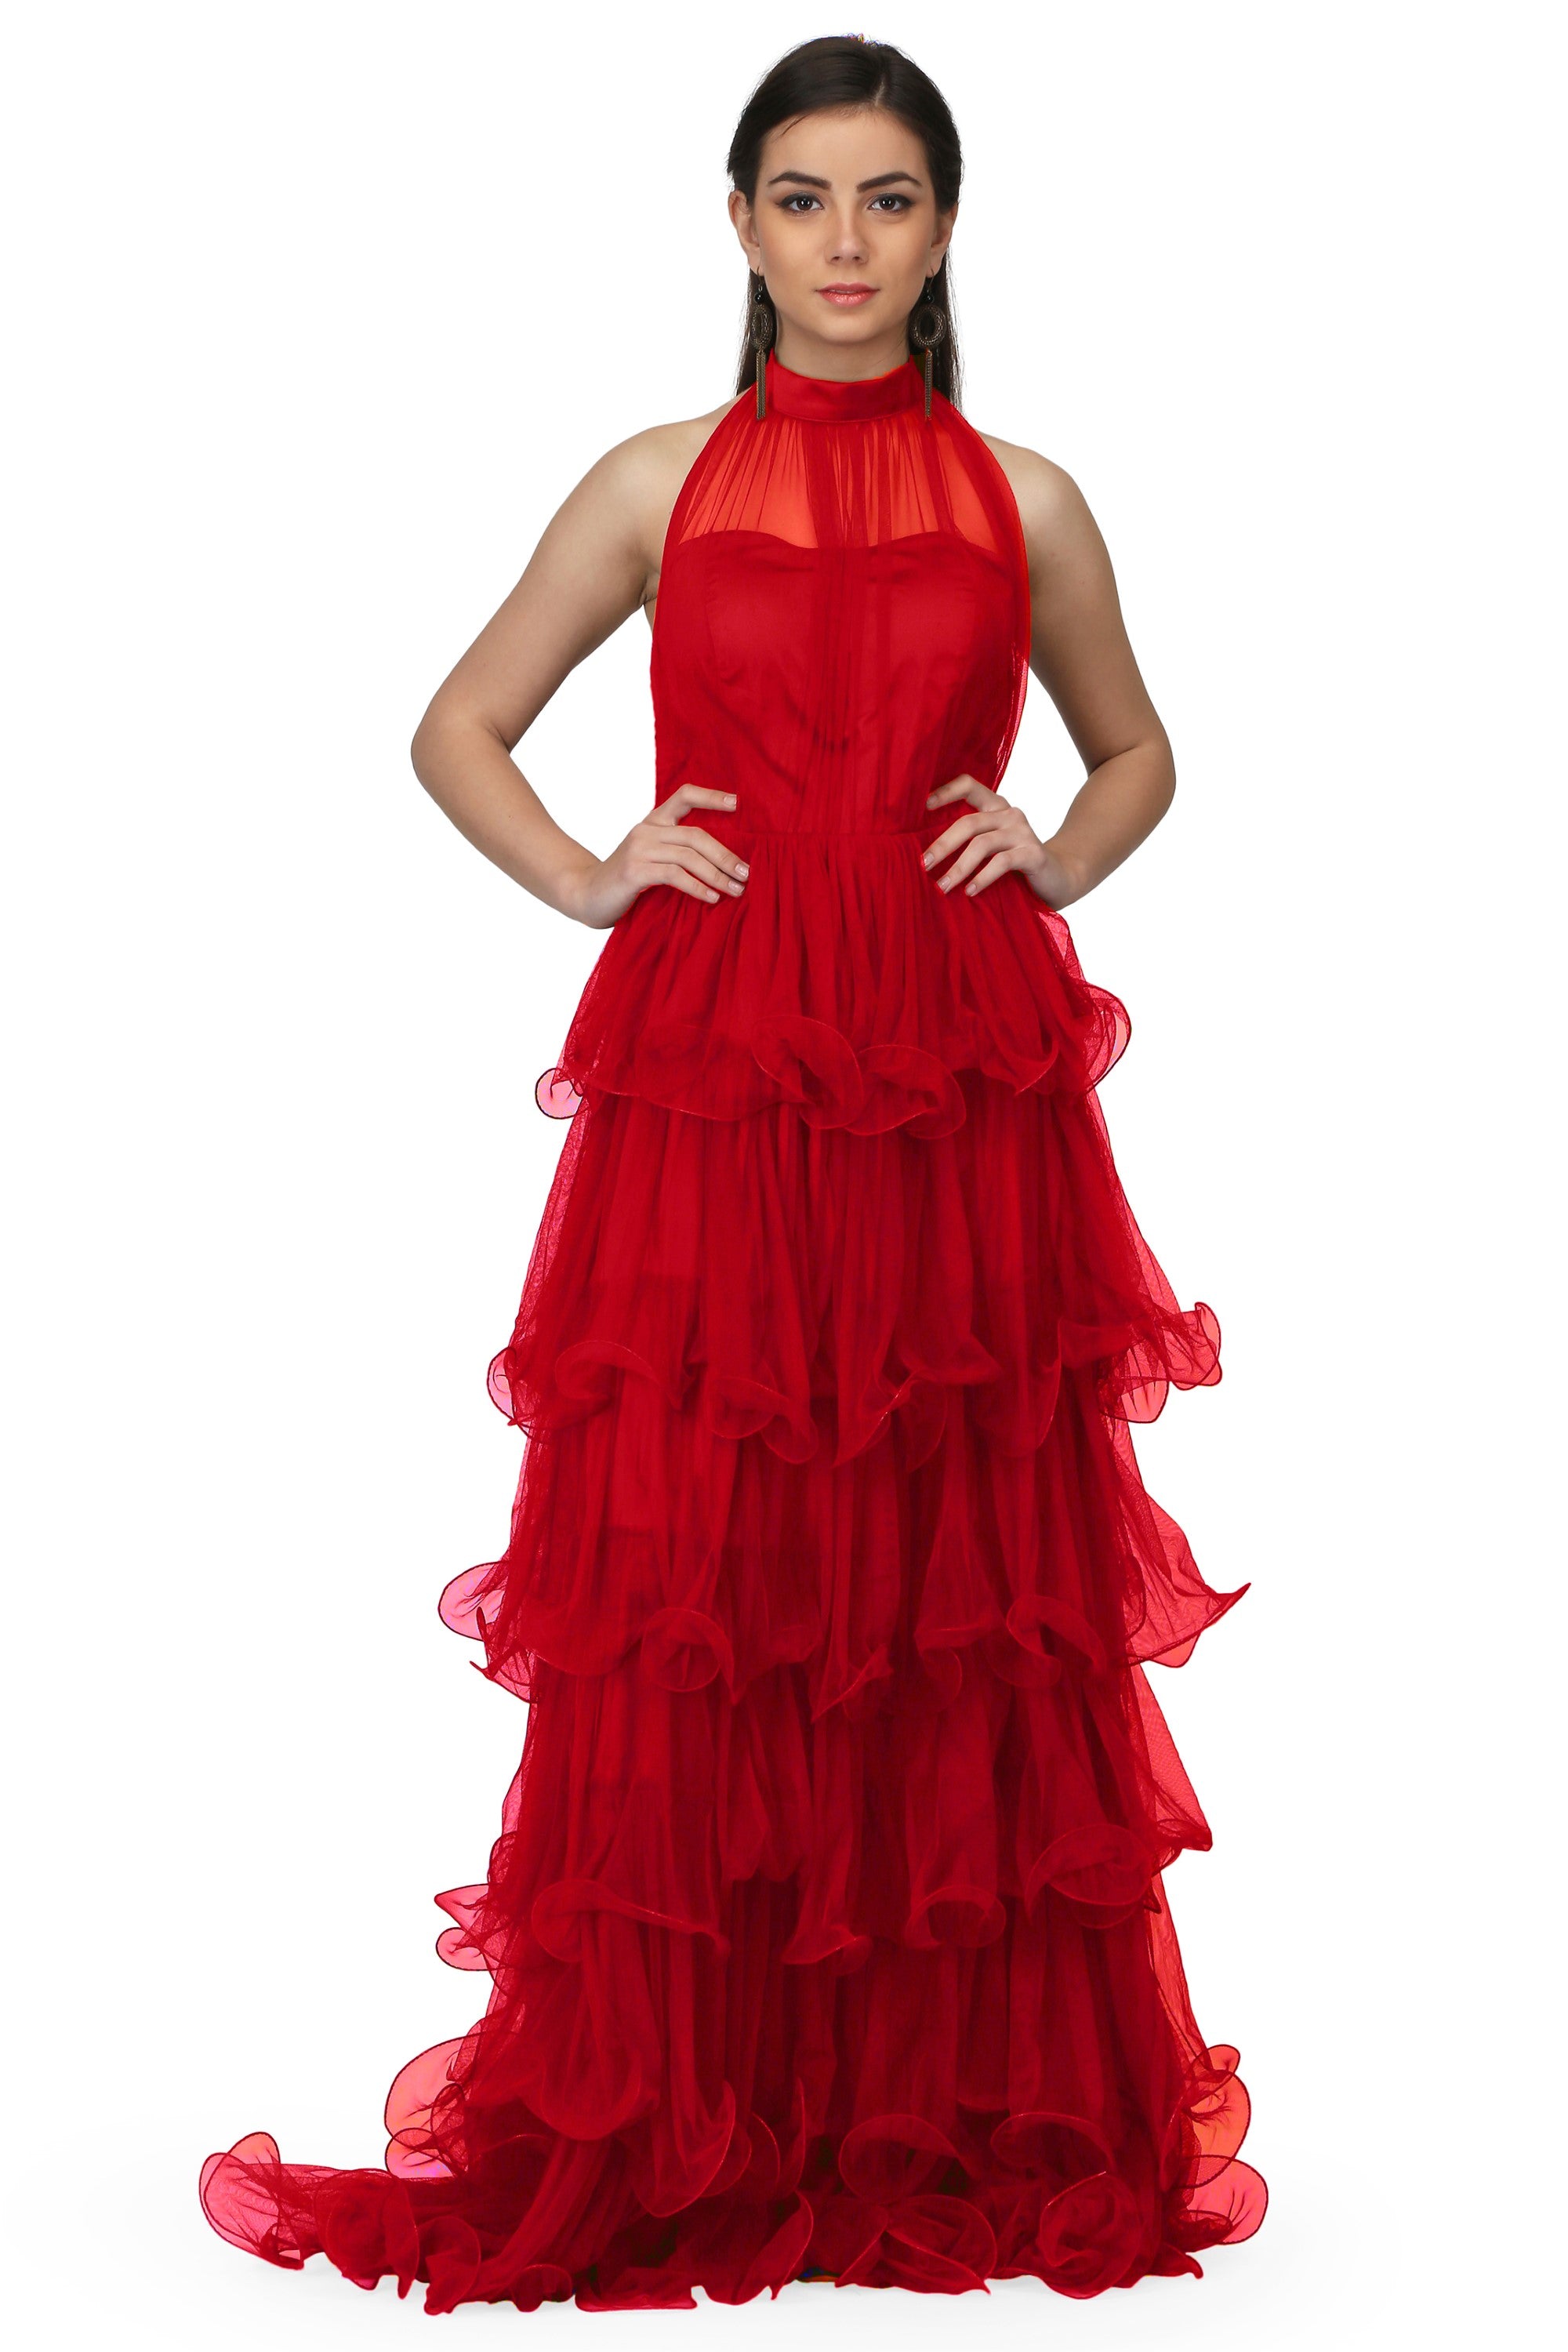 Women's Halter Neck Drape Net  Corset Gown In Red - MIRACOLOS by Ruchi